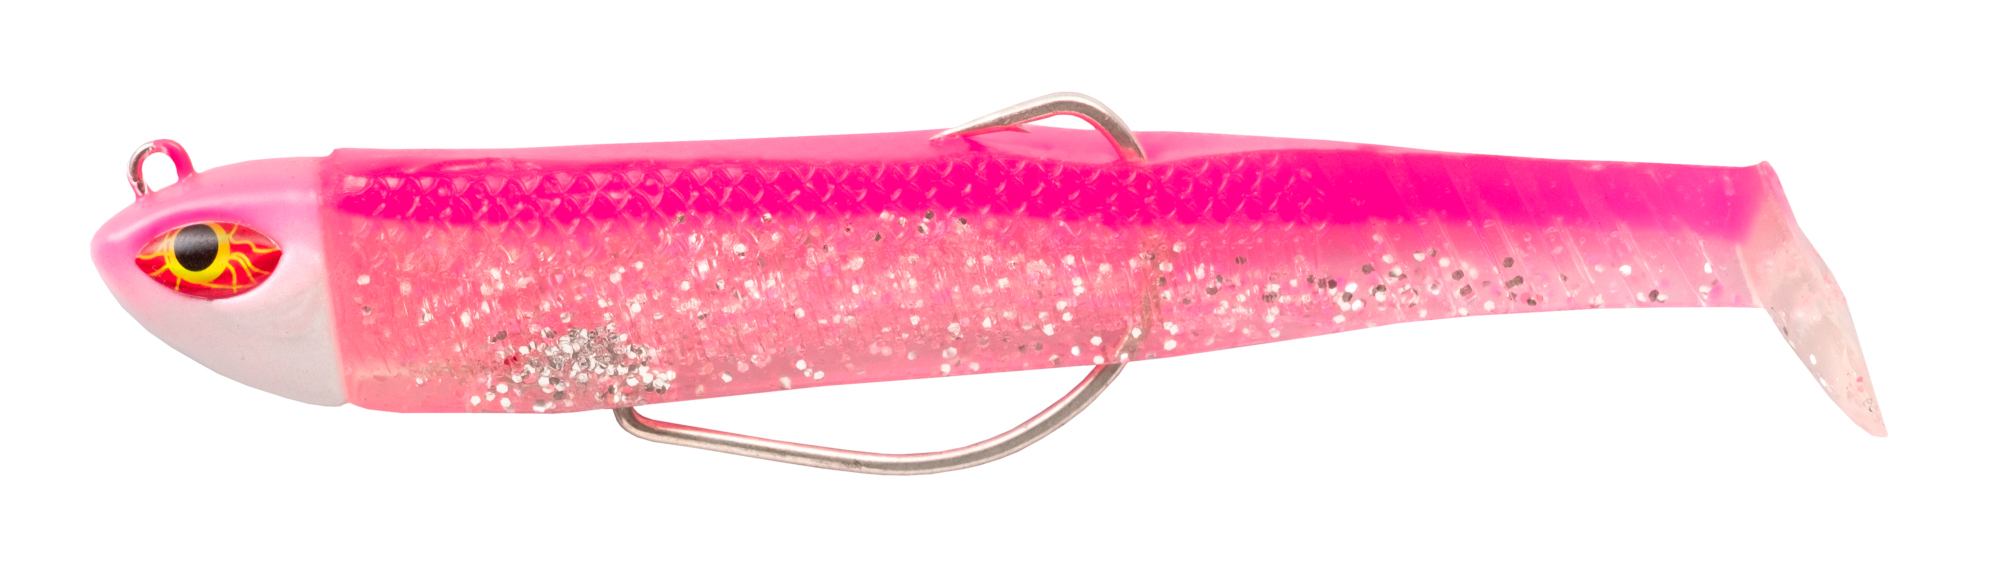 Cinnetic Crafty Candy Shad 17cm (125g) (2 pieces) - Electric Pink